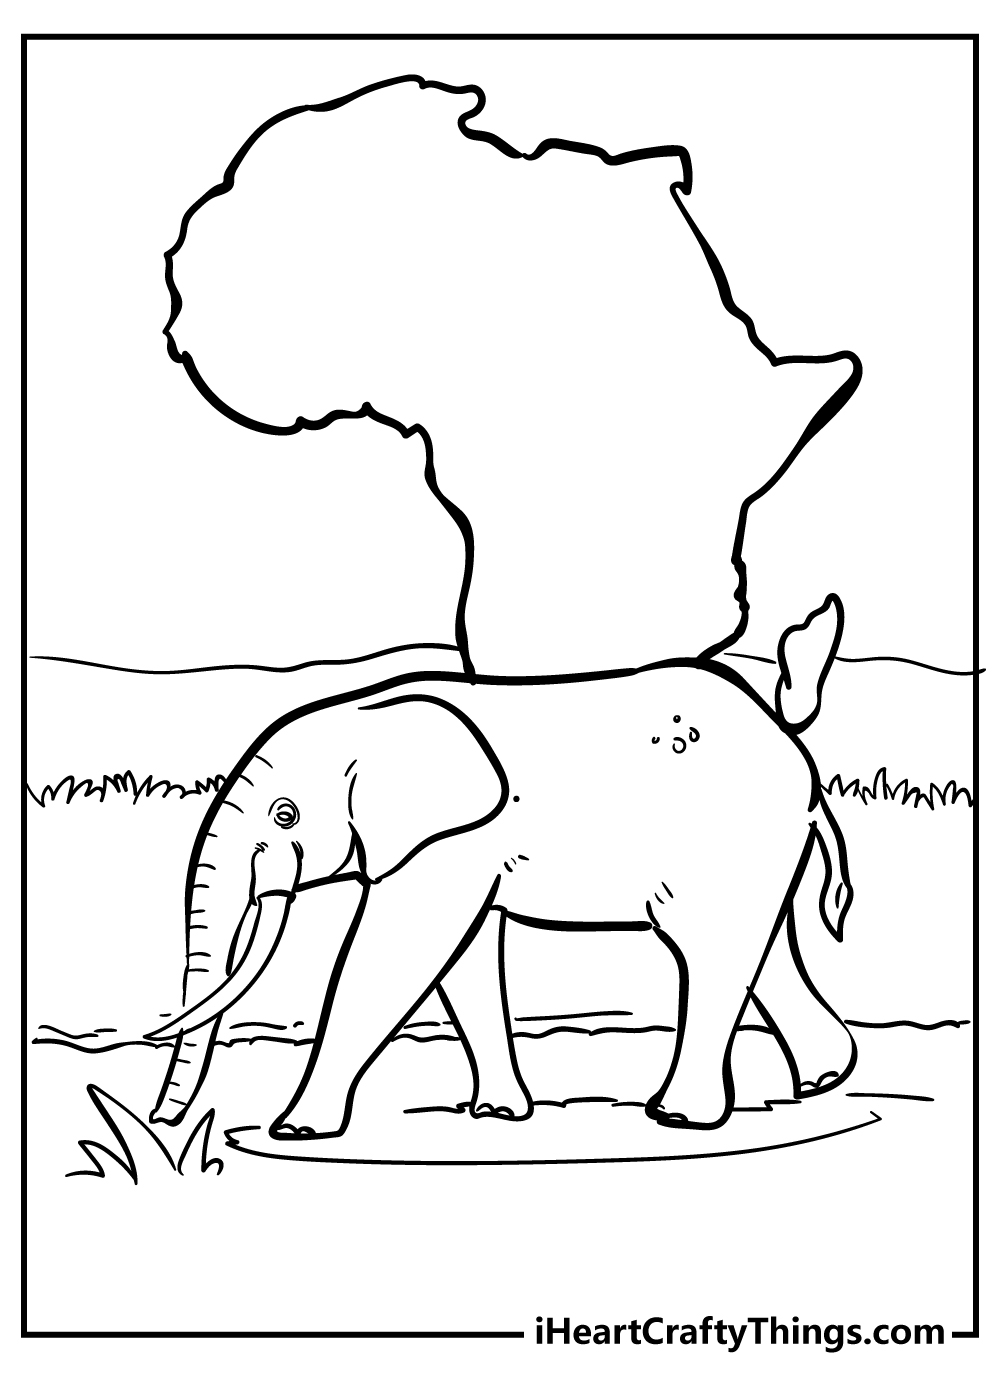 Africa Coloring Pages for preschoolers free printable